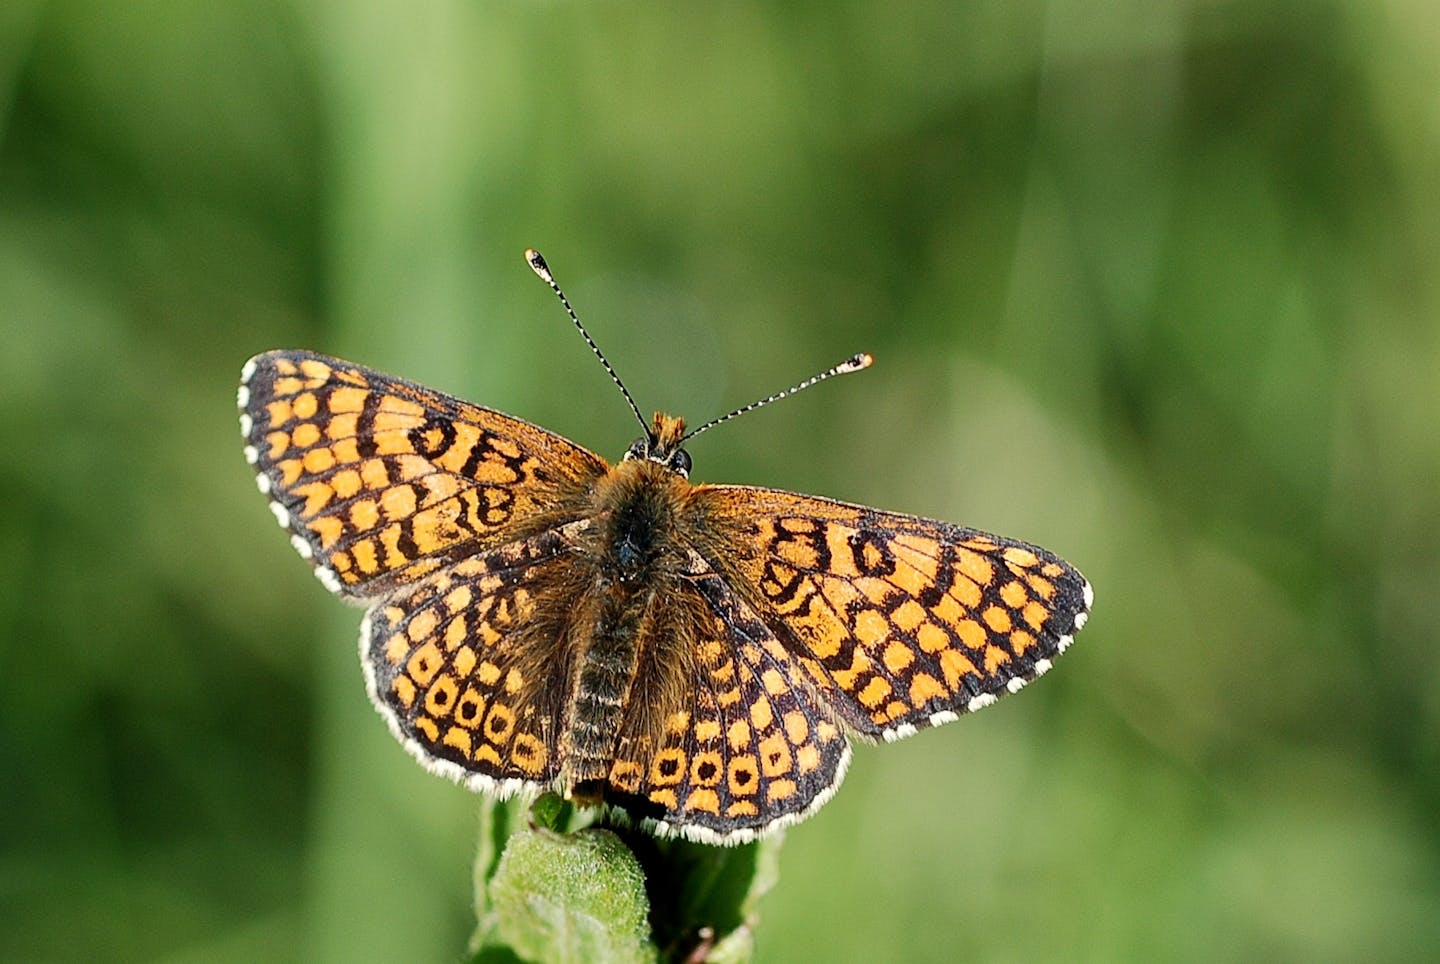 Horses can help threatened butterfly species